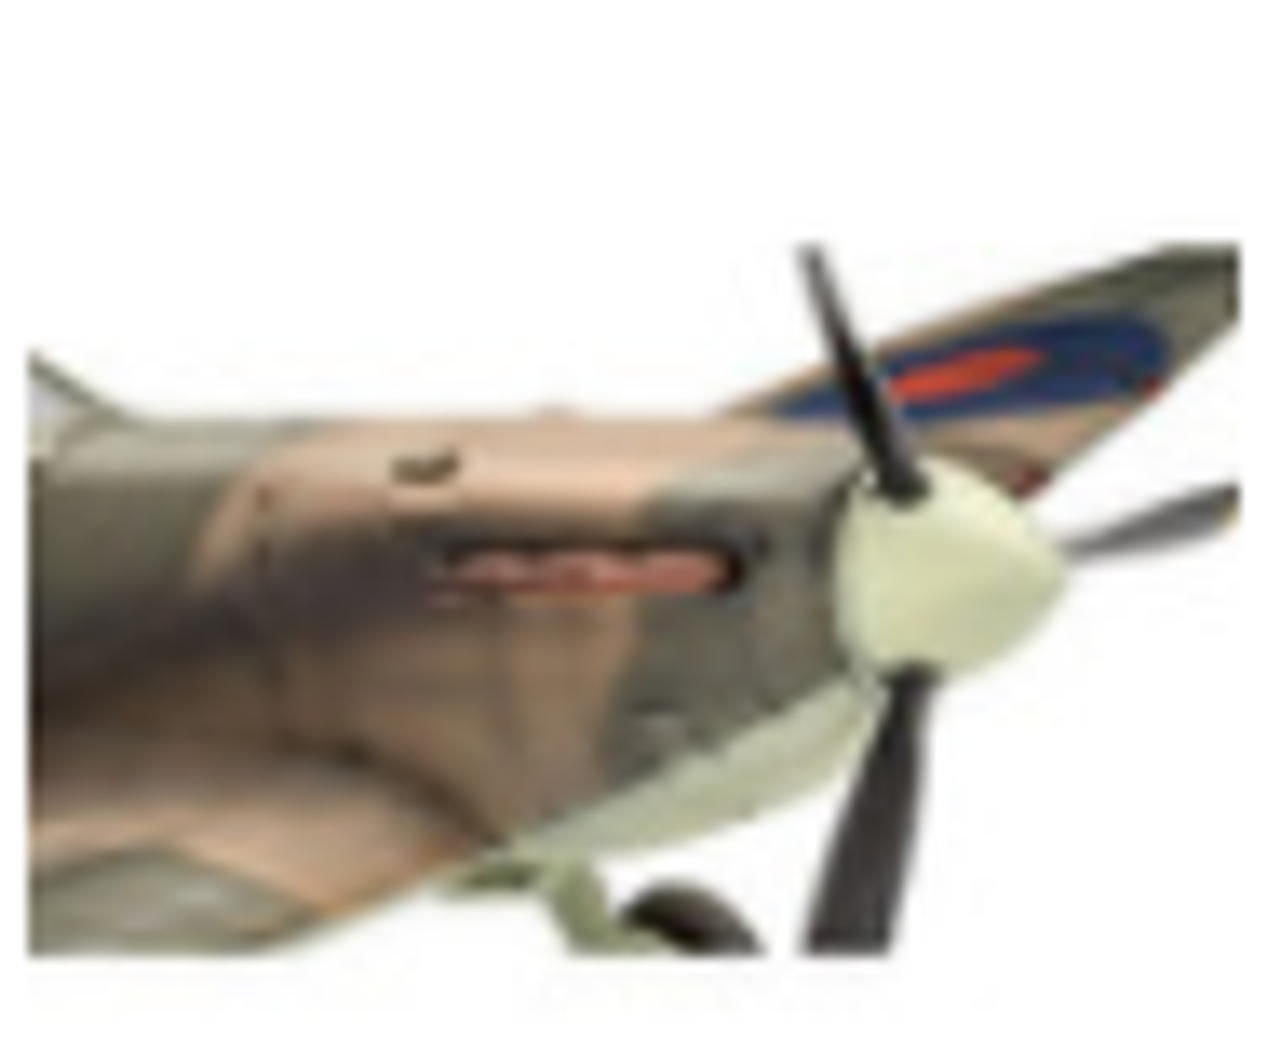 Level 4 Model Kit Spitfire MK. II Fighter Plane "Iron Maiden: Aces High" 1/32 Scale Model by Revell